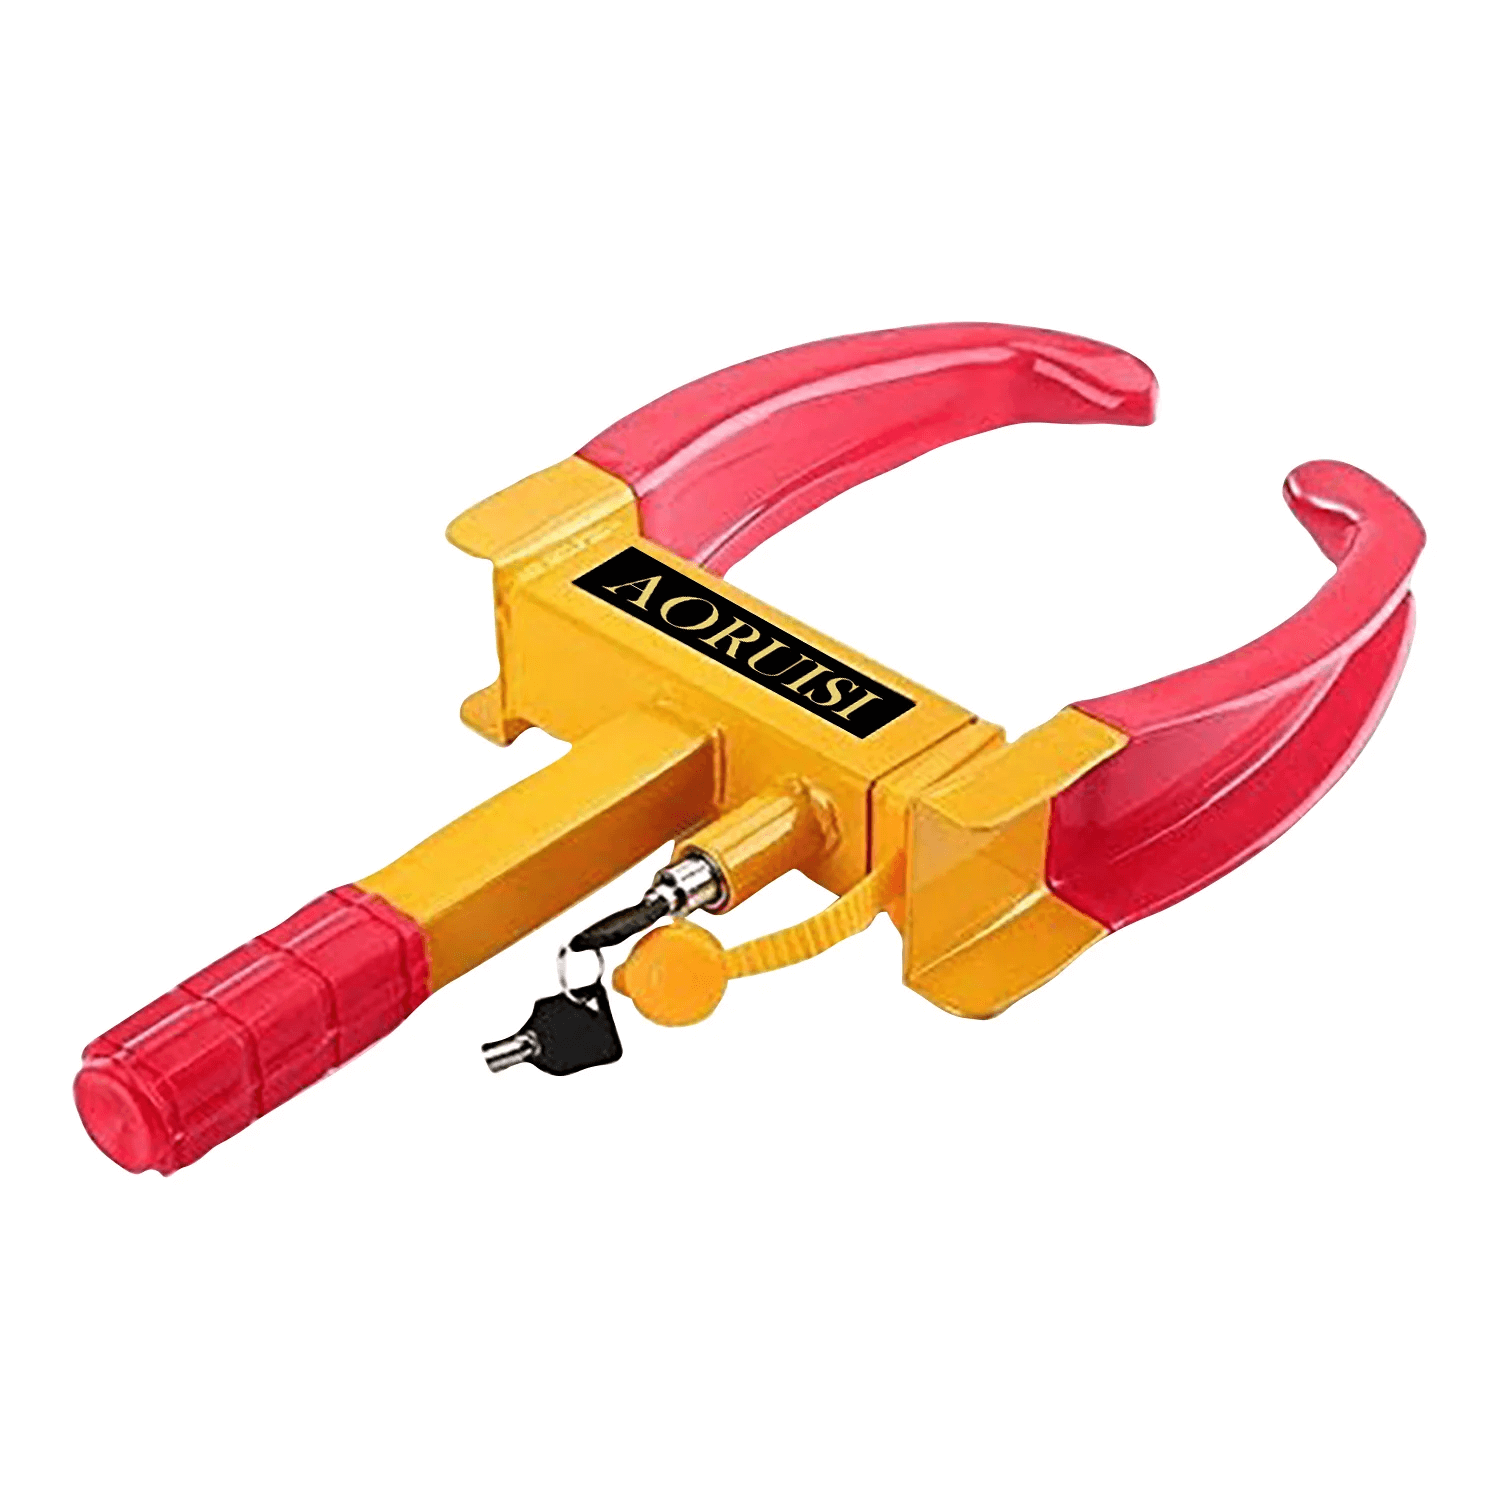 robustt-wheel-locker-red-yellow-cold-rolled-ms-steel-adjustable-heavy-duty-anti-theft-painted-tyre-lock-with-2-keys-pack-of-1